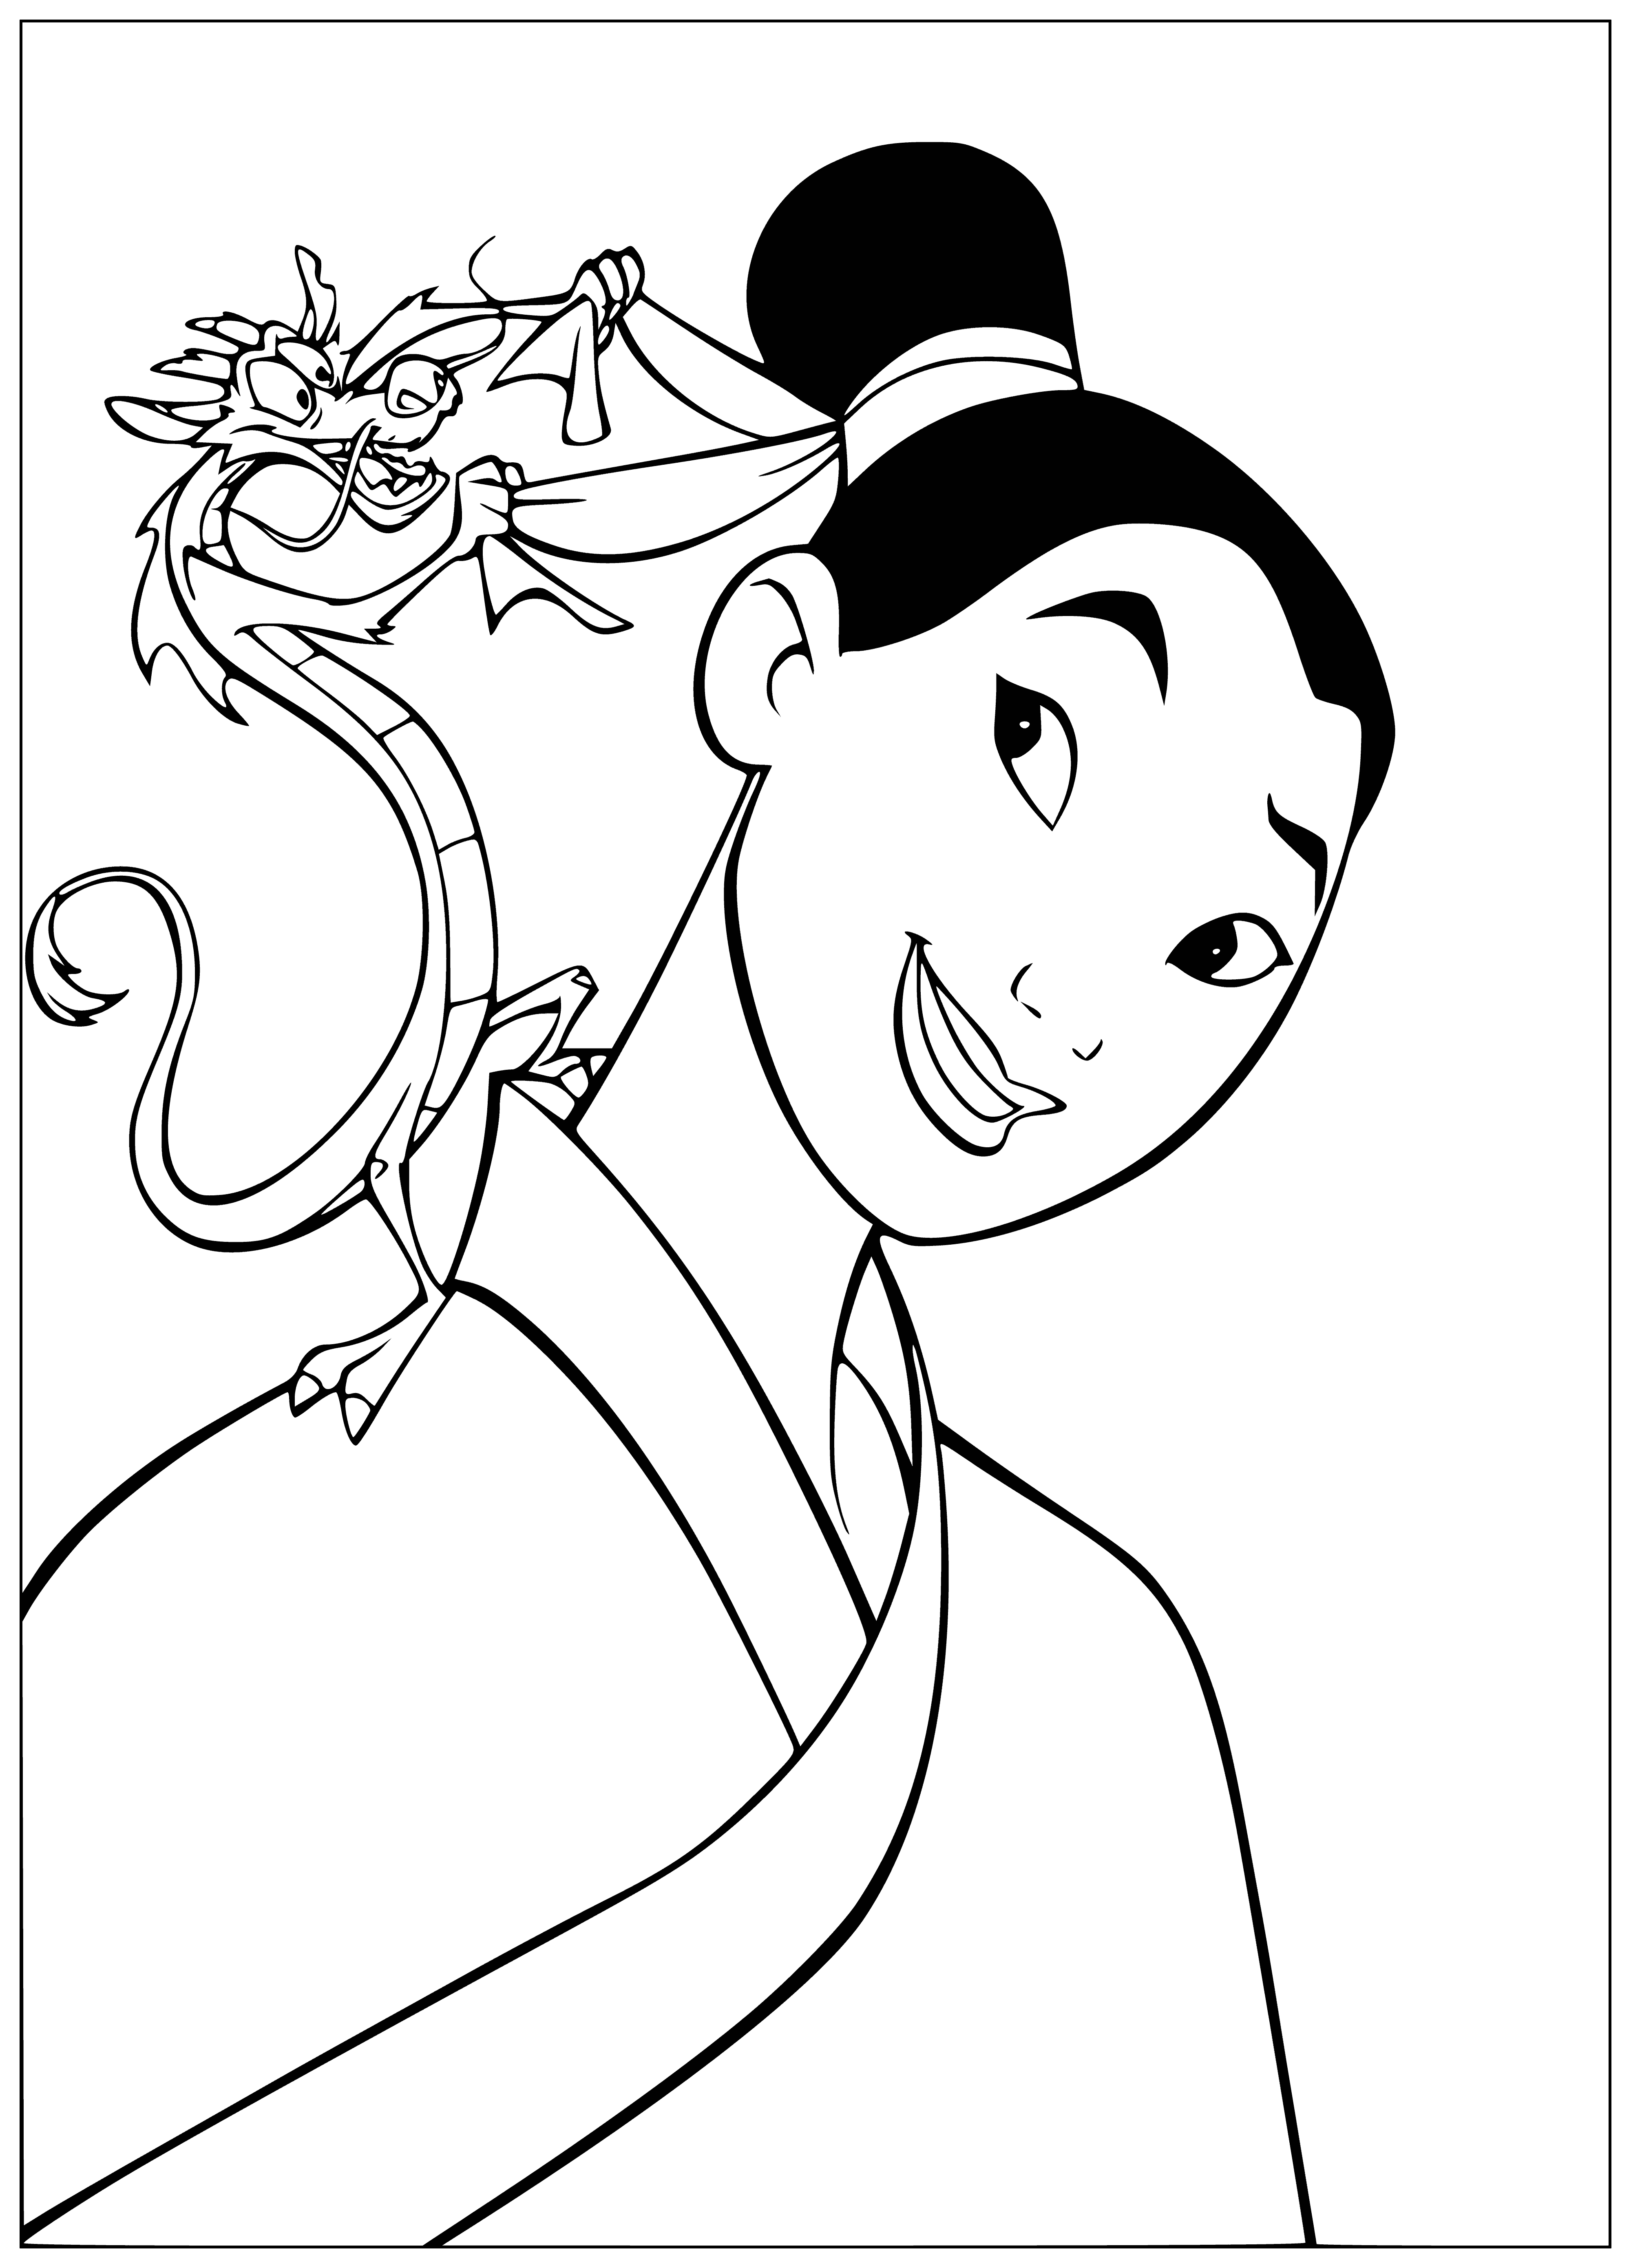 coloring page: A woman in armor with a sword, shield and ponytail, standing before a mountain.